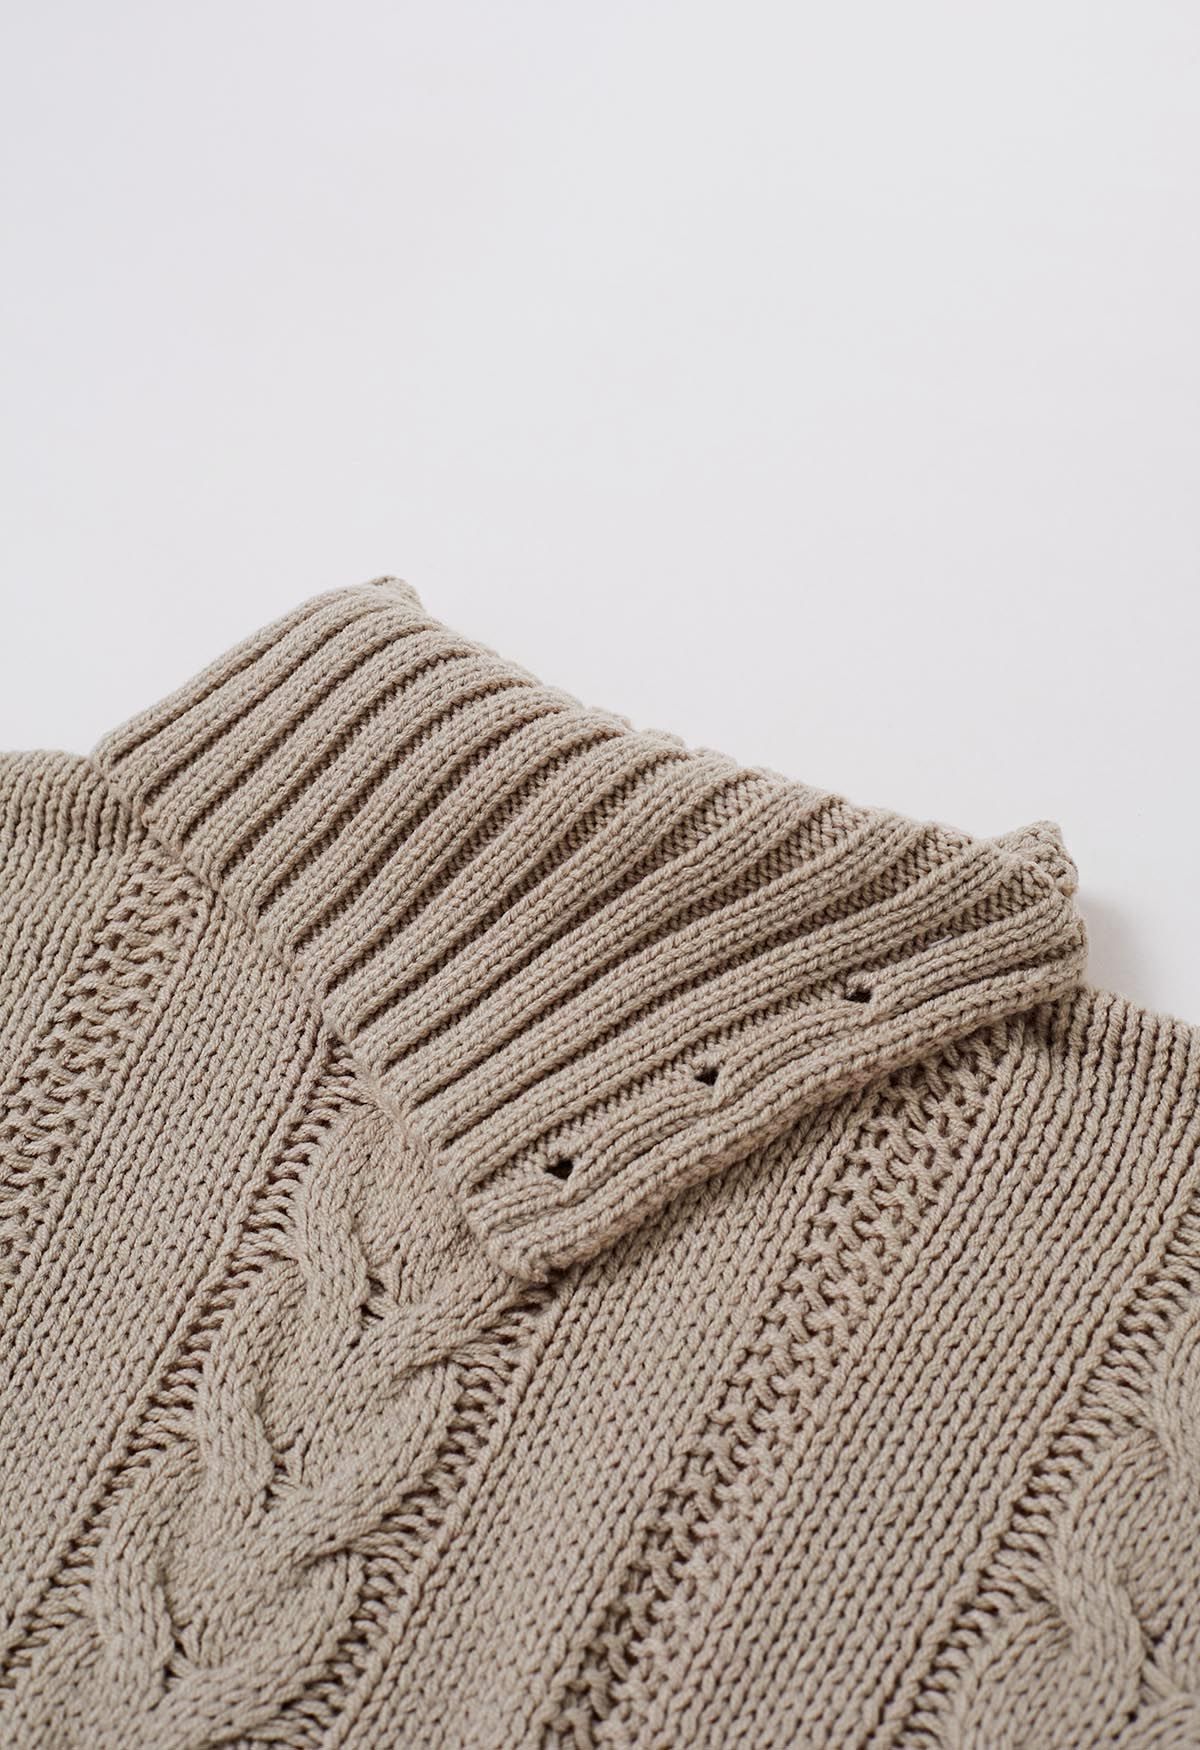 Side Button Cowl Neck Cable Knit Sweater in Light Tan